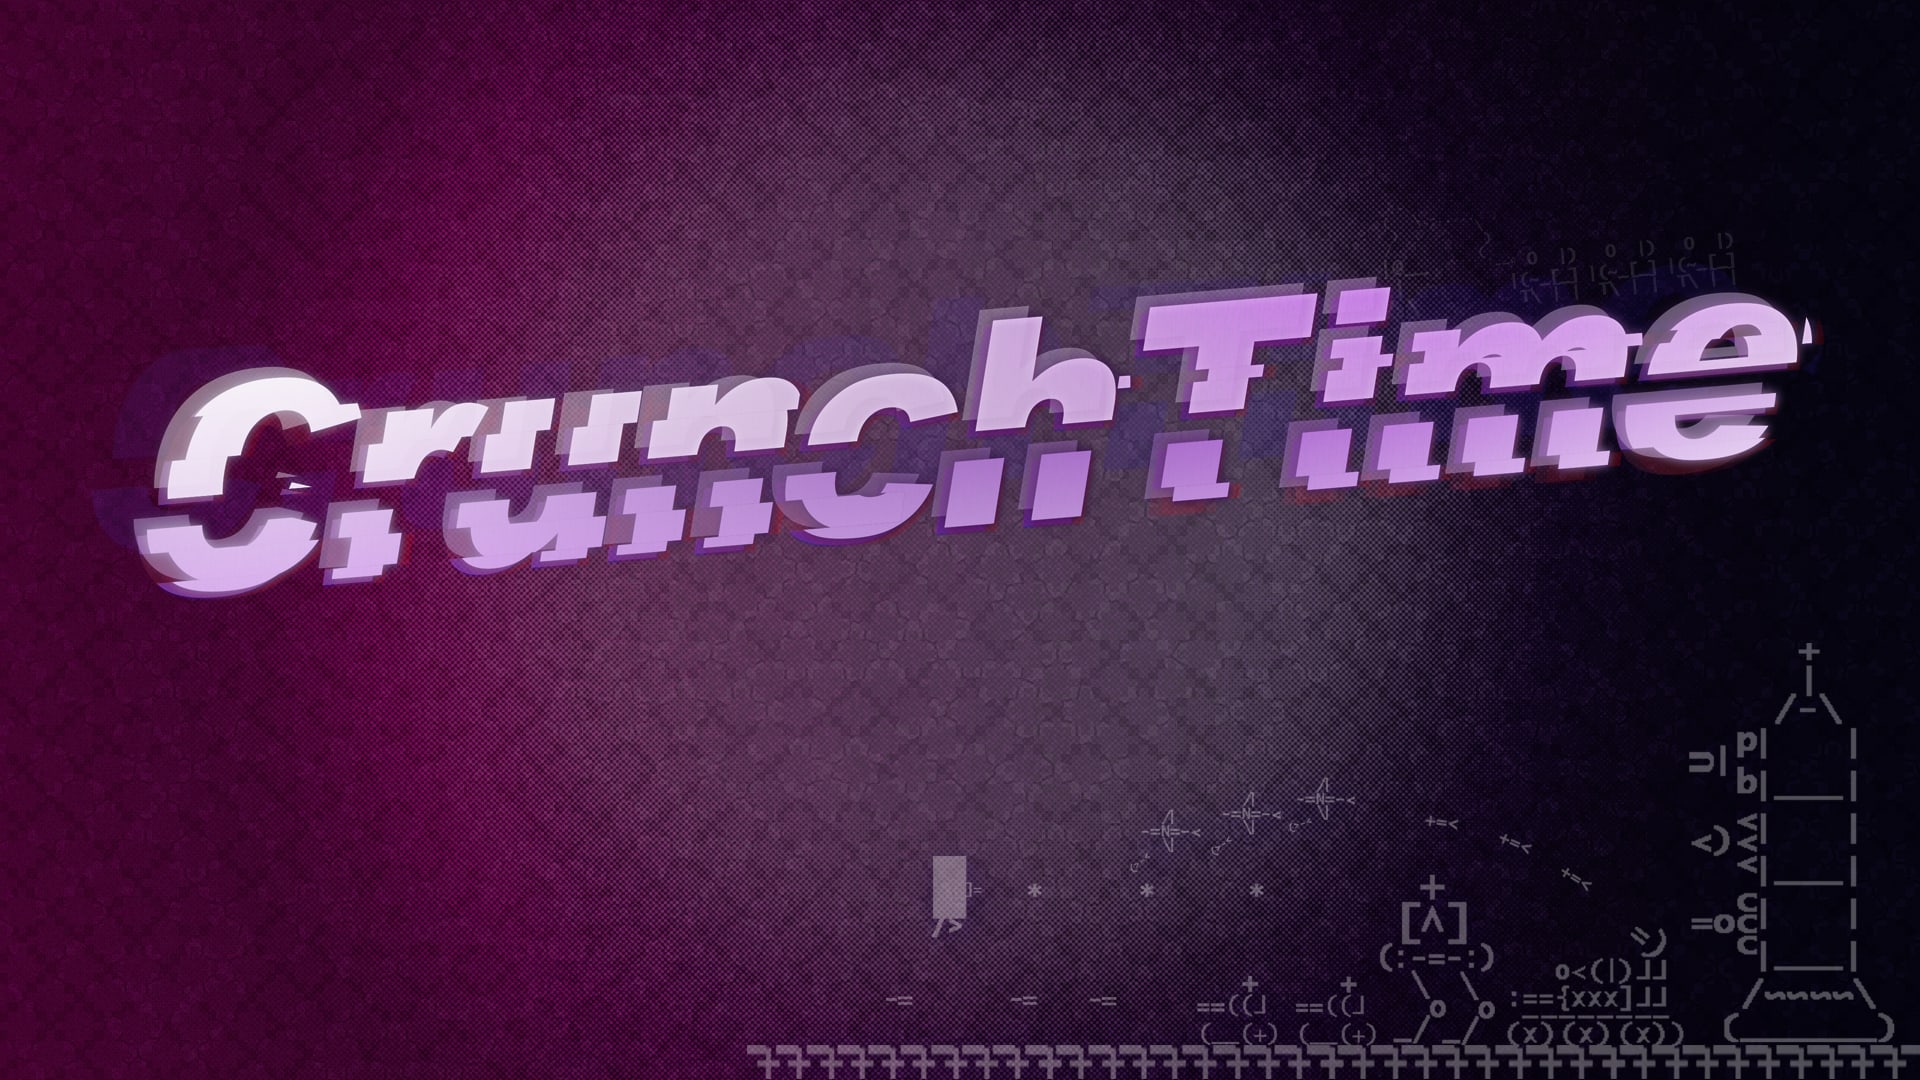 CrunchTime